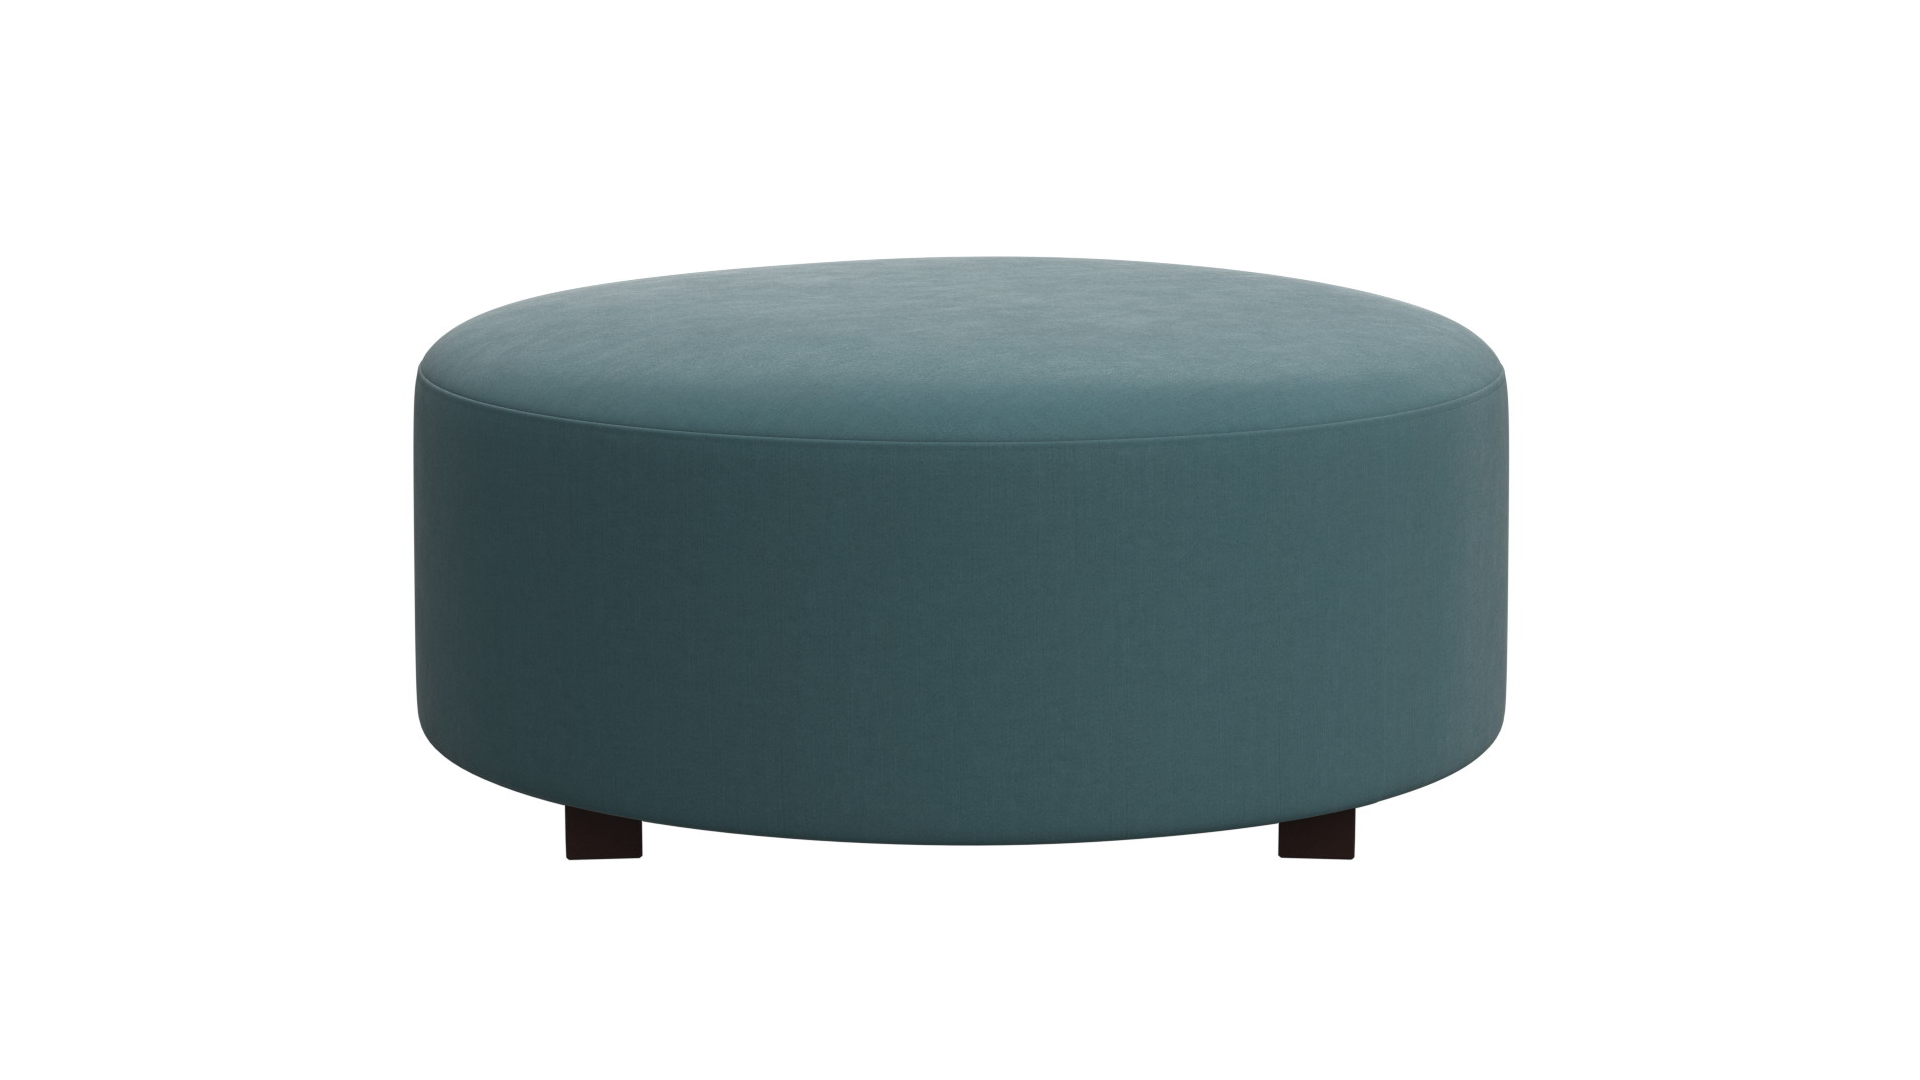 Syd 38" Round Cocktail Ottoman, Dune Sky - Image 0